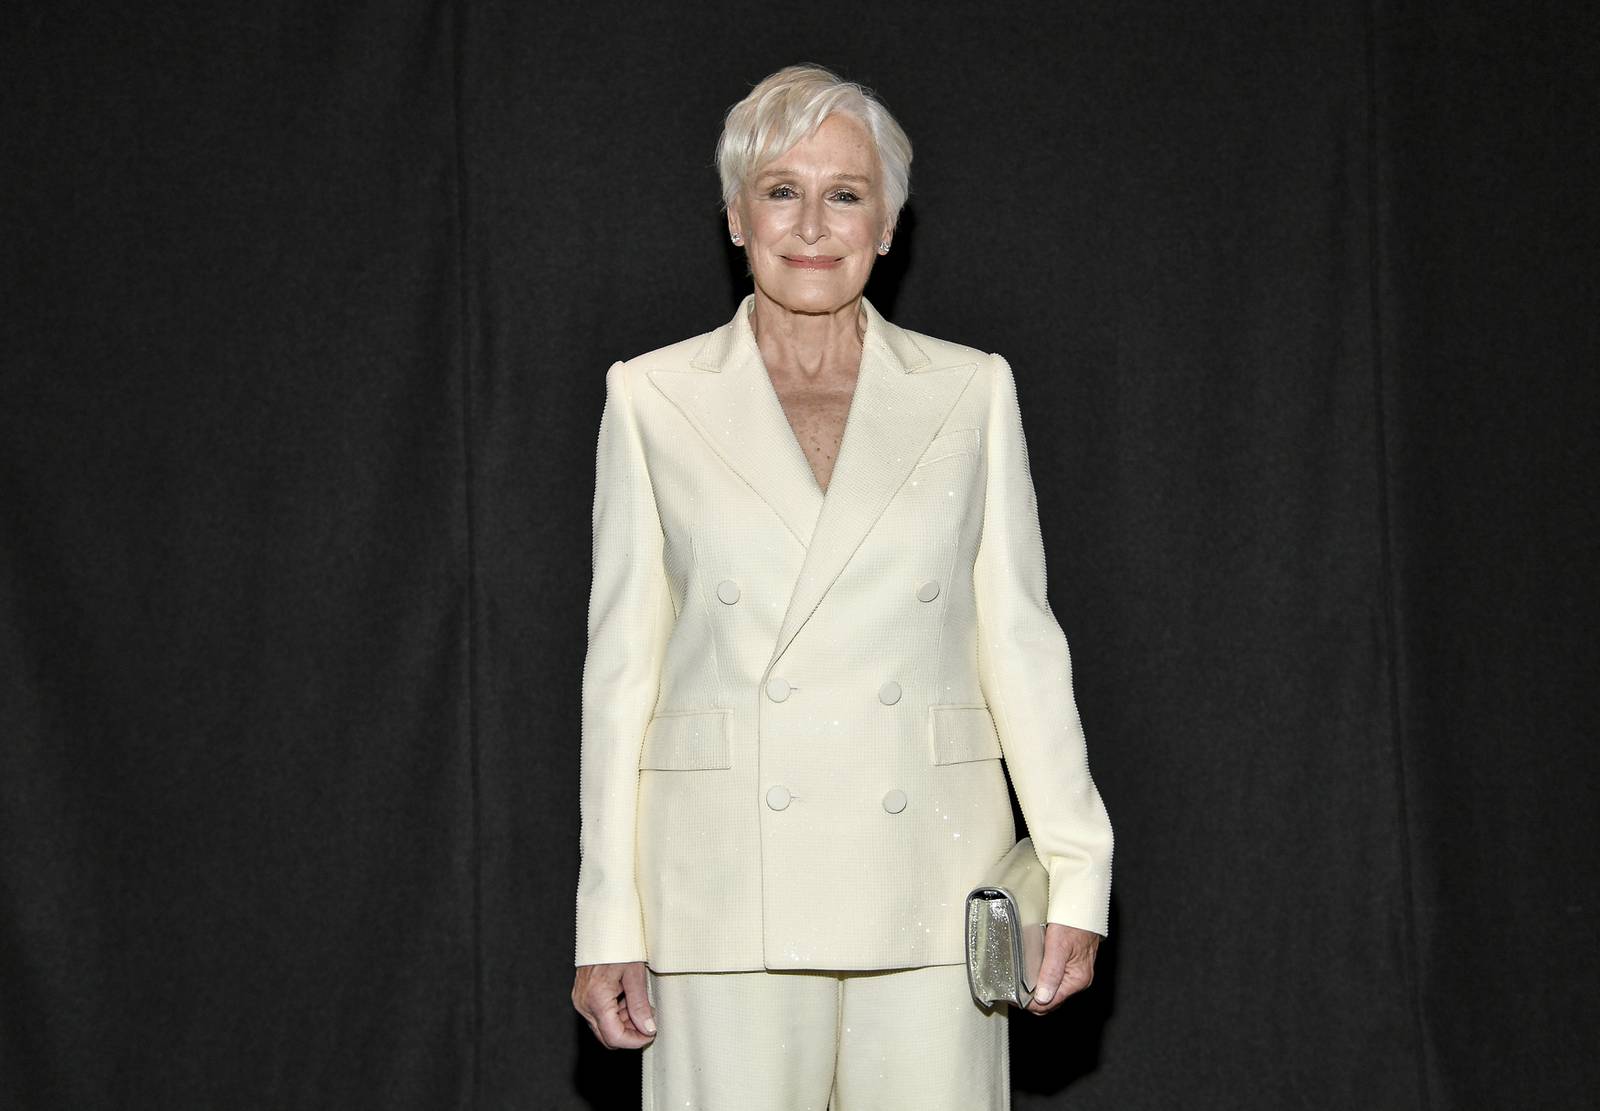 Ralph Lauren goes minimal for latest fashion show, with muted tones and ...